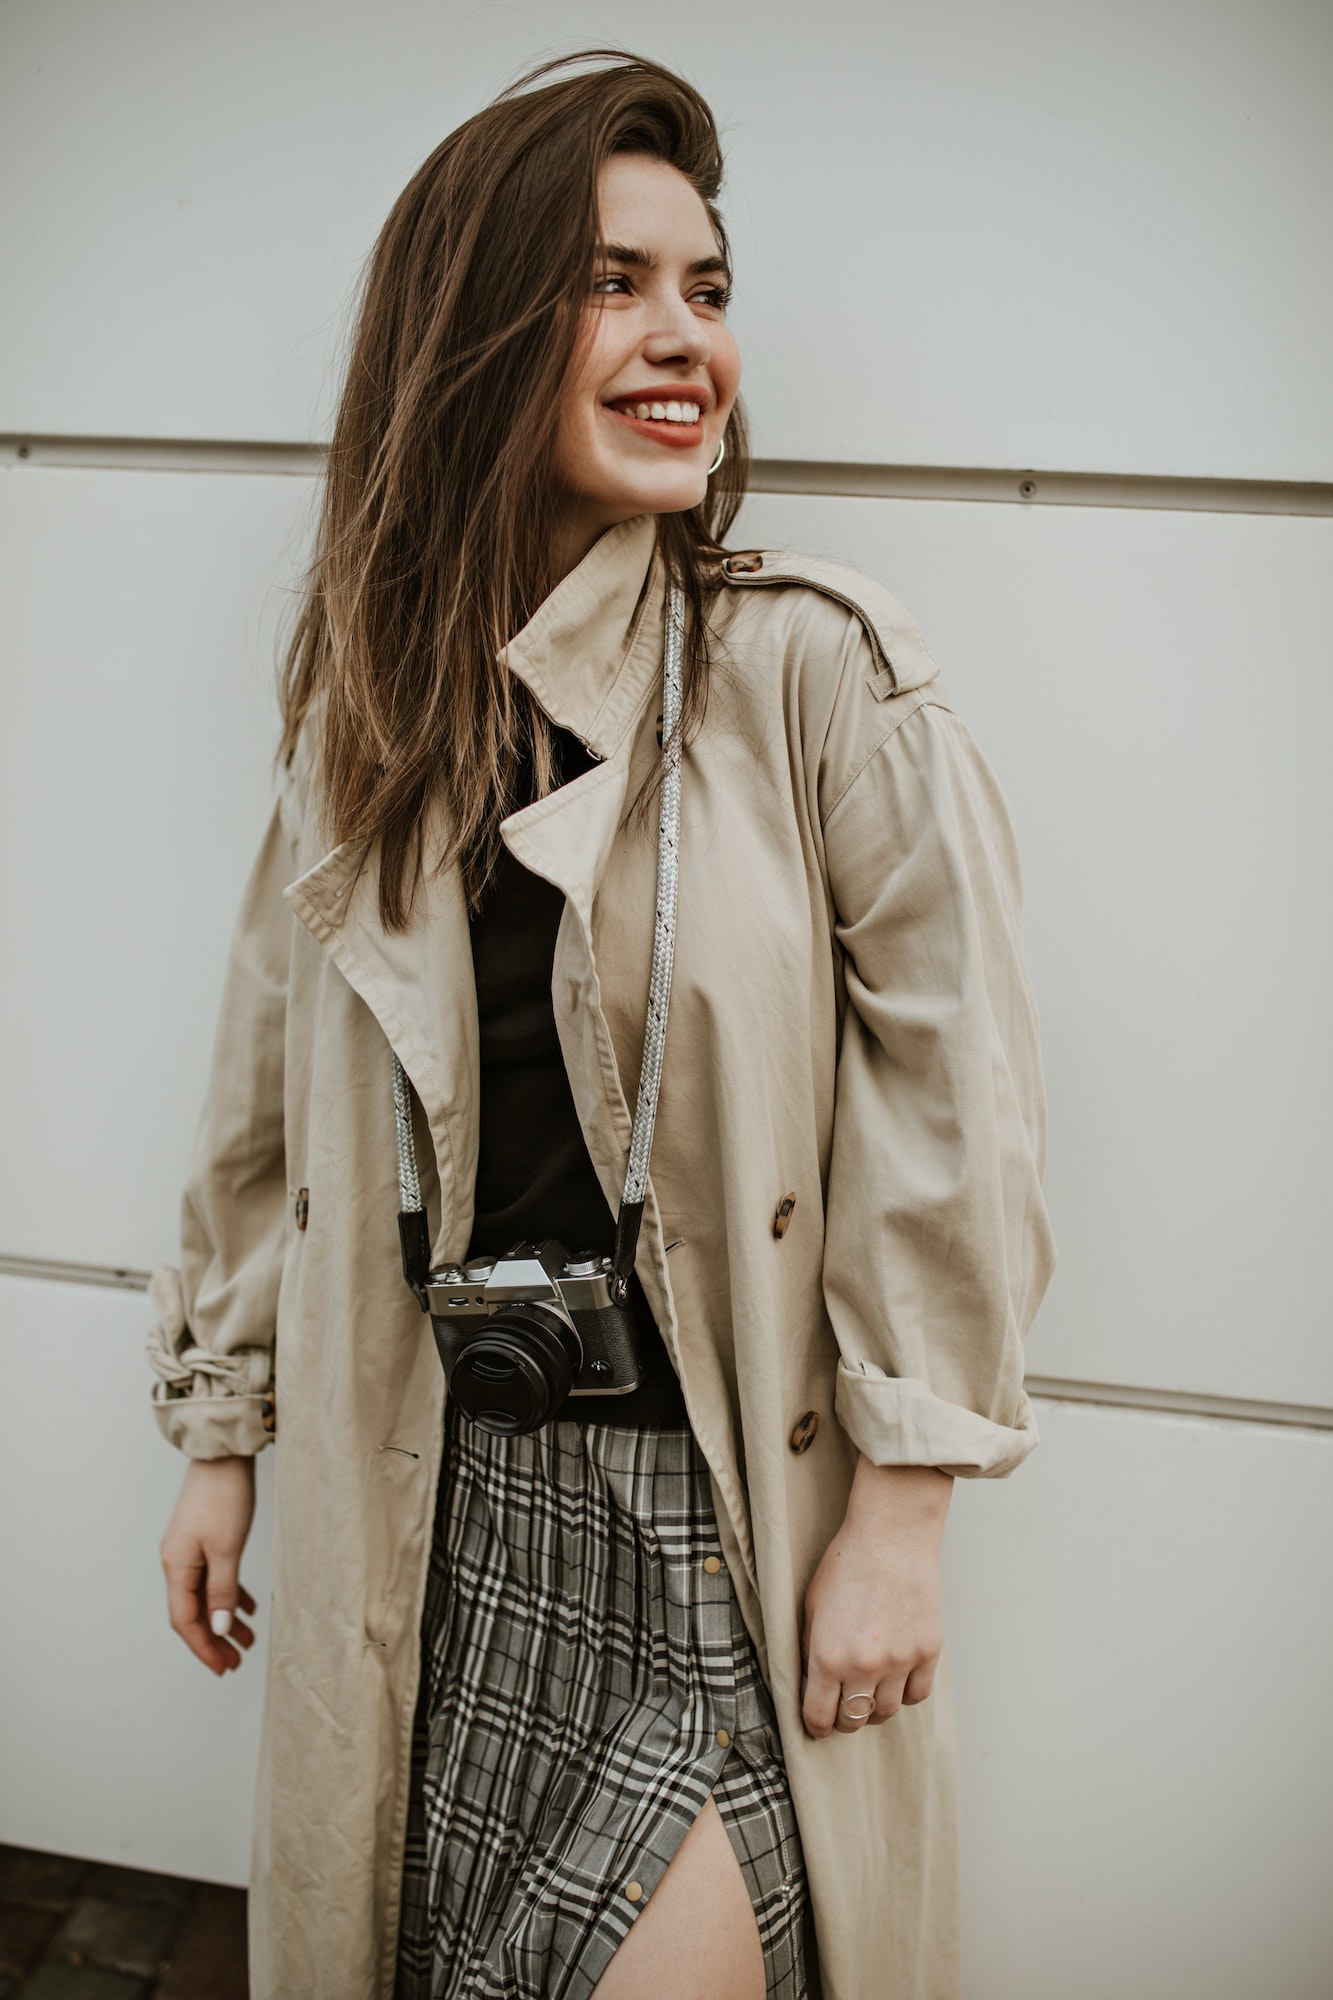 Cheerful attractive woman in checkered skirt and stylish midi beige trench coat smiles, looks away